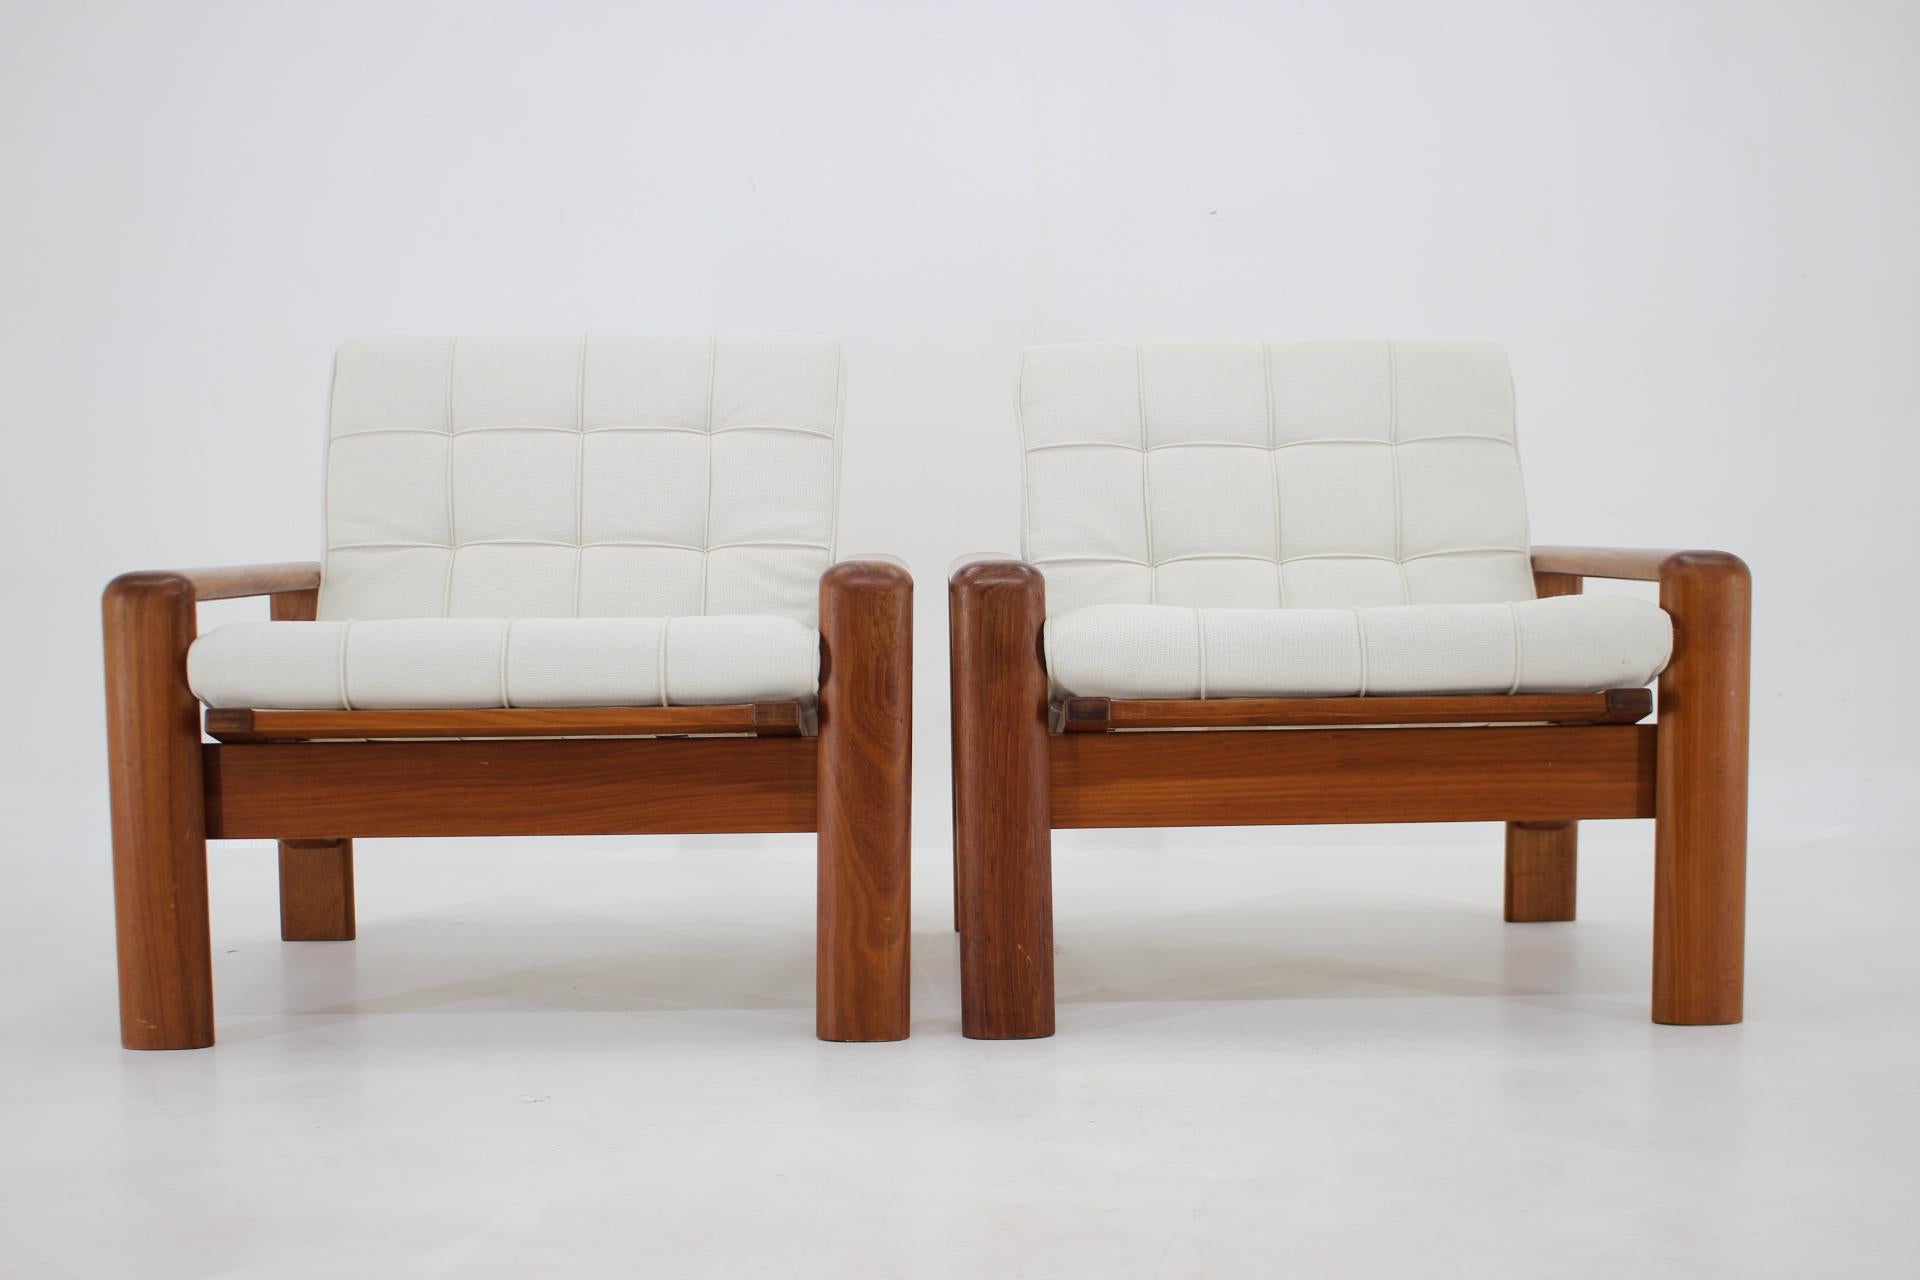 1970s Pair of Teak Armchairs by EMC Mobler, Denmark In Good Condition For Sale In Praha, CZ